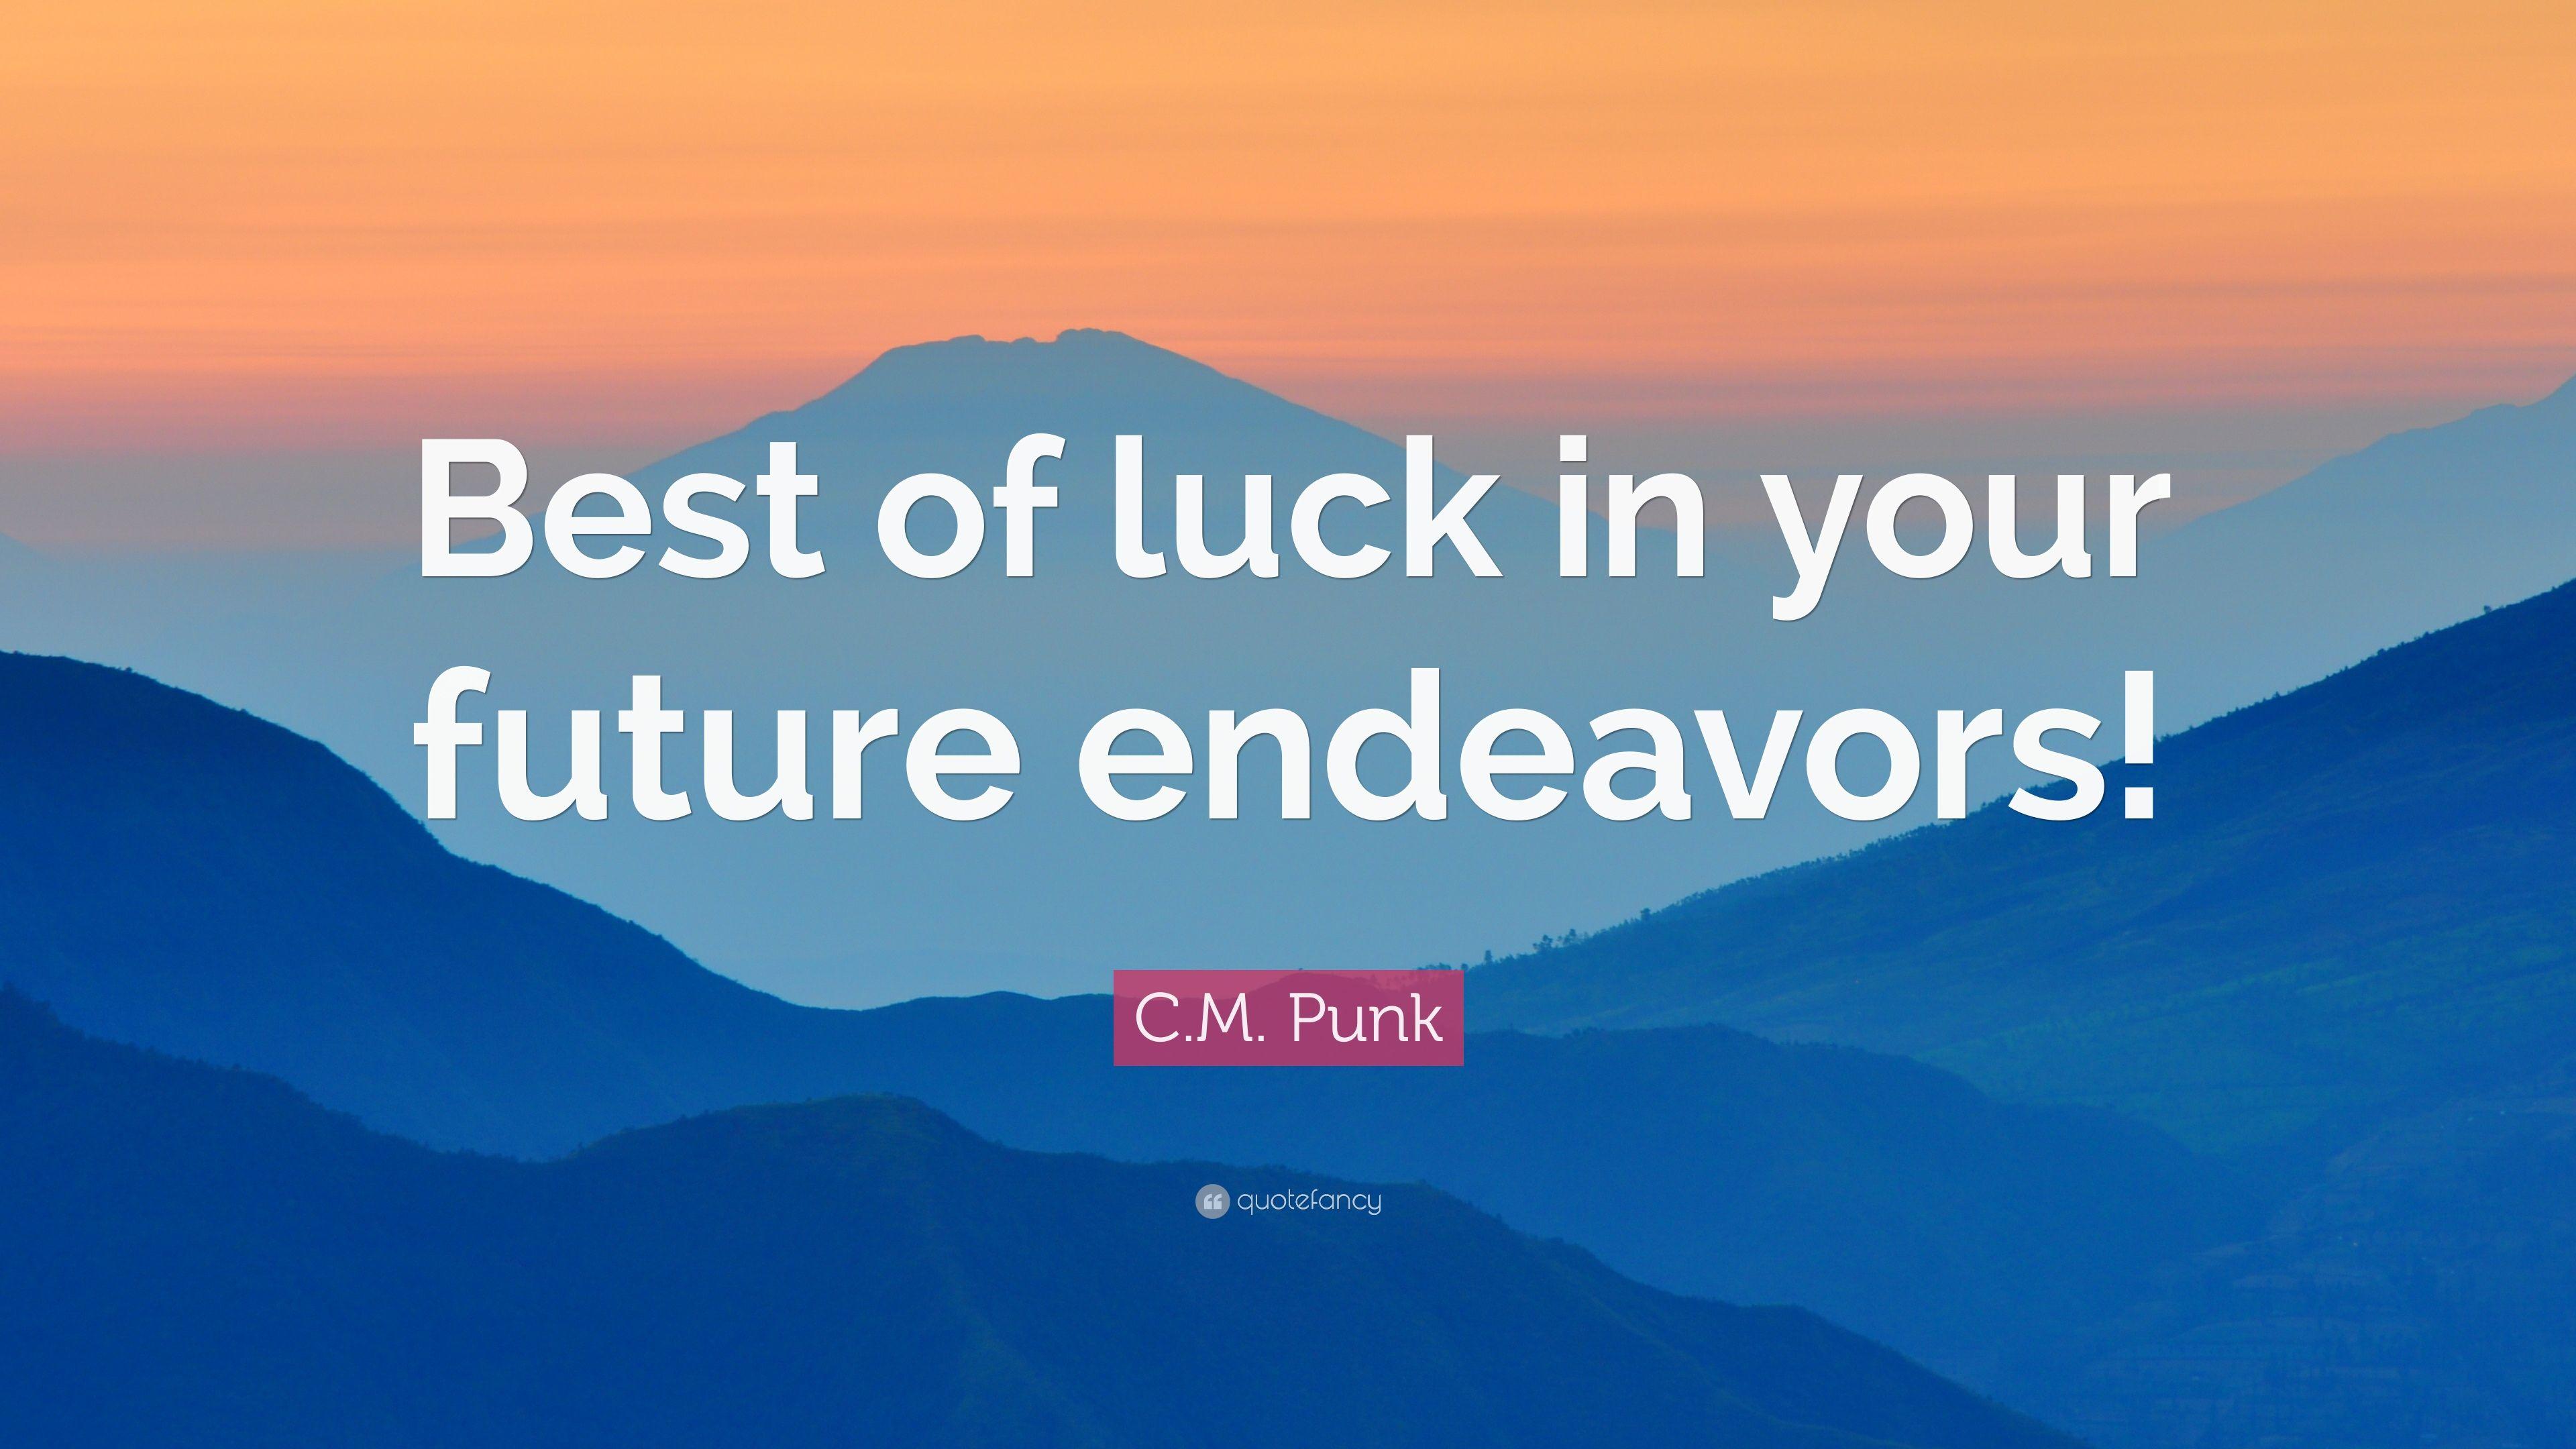 C.M. Punk Quote: “Best of luck in your future endeavors!” 9